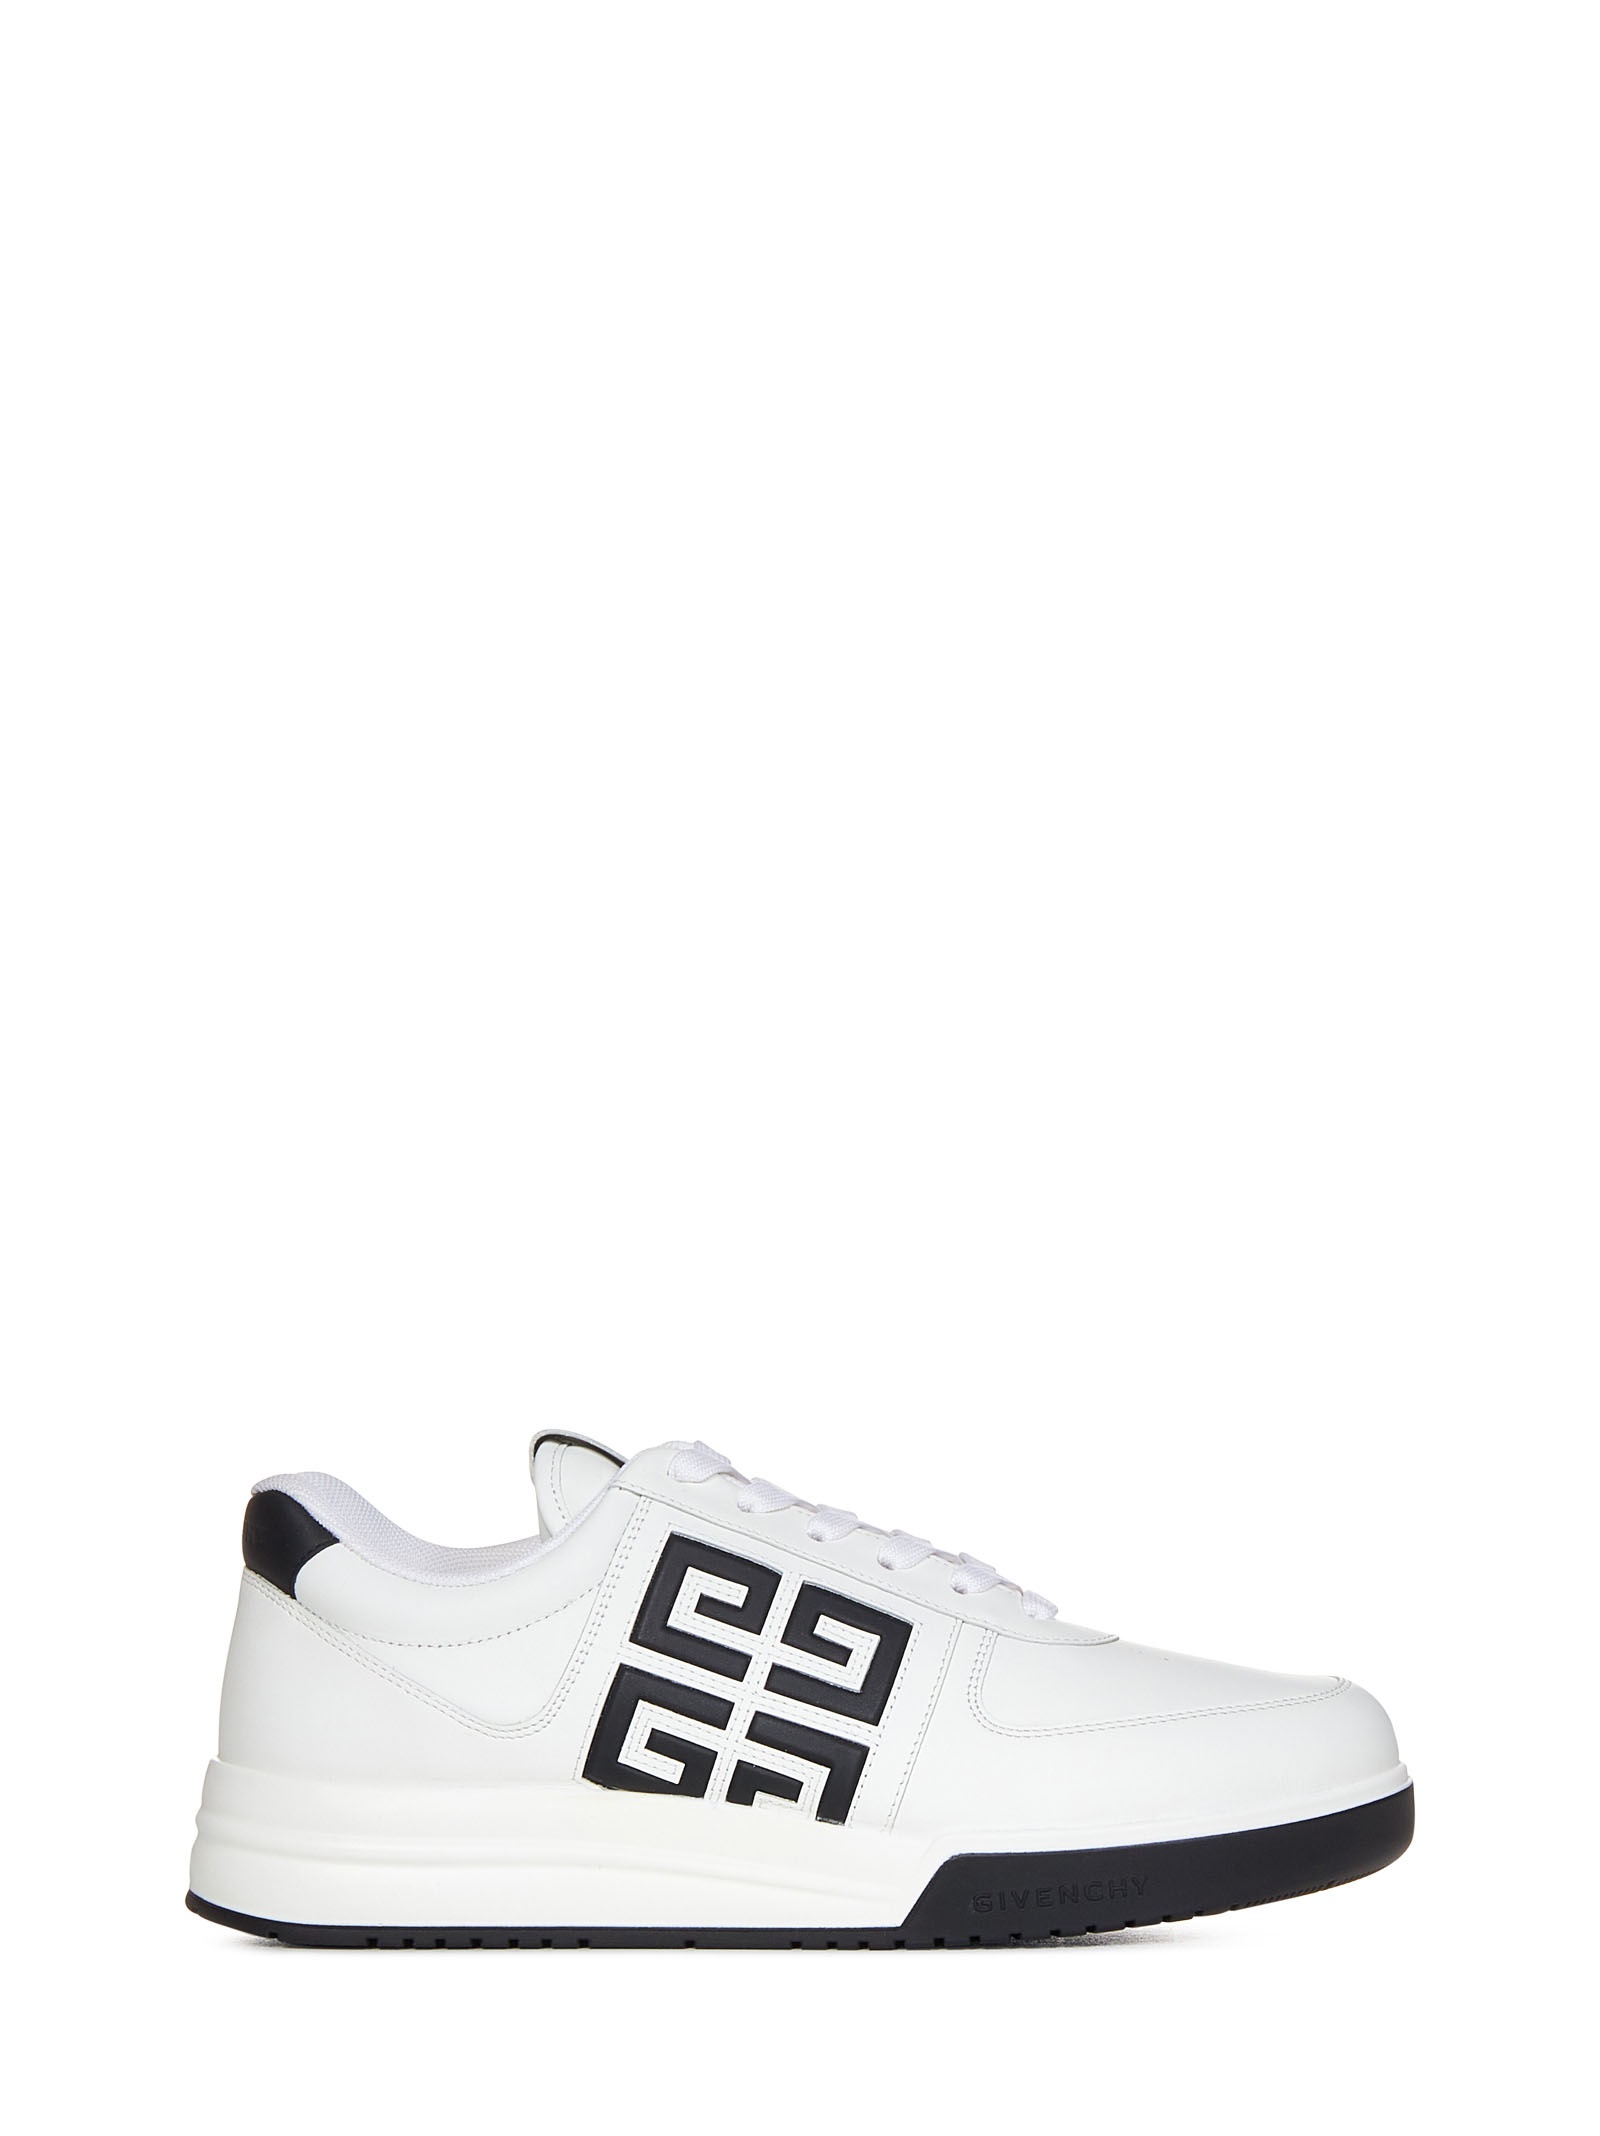 White calf leather low-top sneakers with embossed black 4G logo at side. - 1